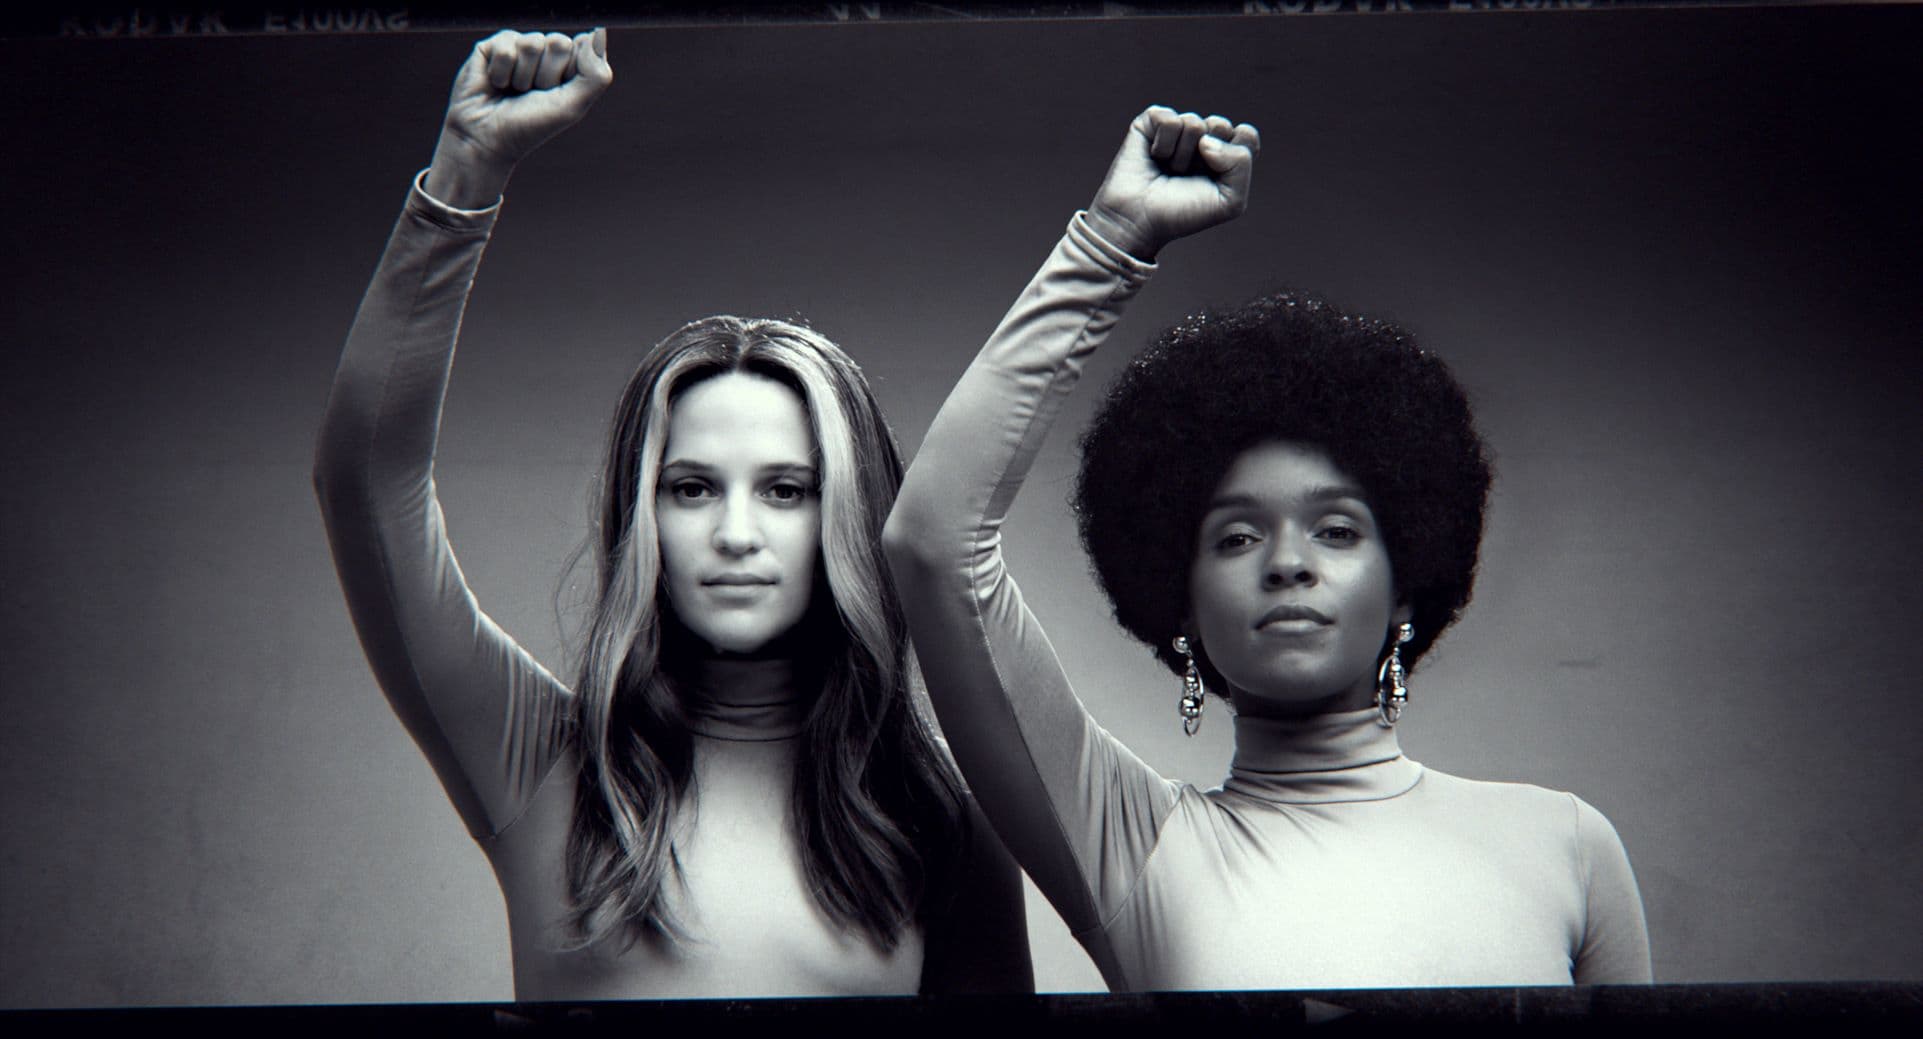 Alicia Vikander as Gloria Steinem and Janelle Monáe as Dorothy Pitman Hughes in “The Glorias.” (Courtesy LD Entertainment and Roadside Attractions)